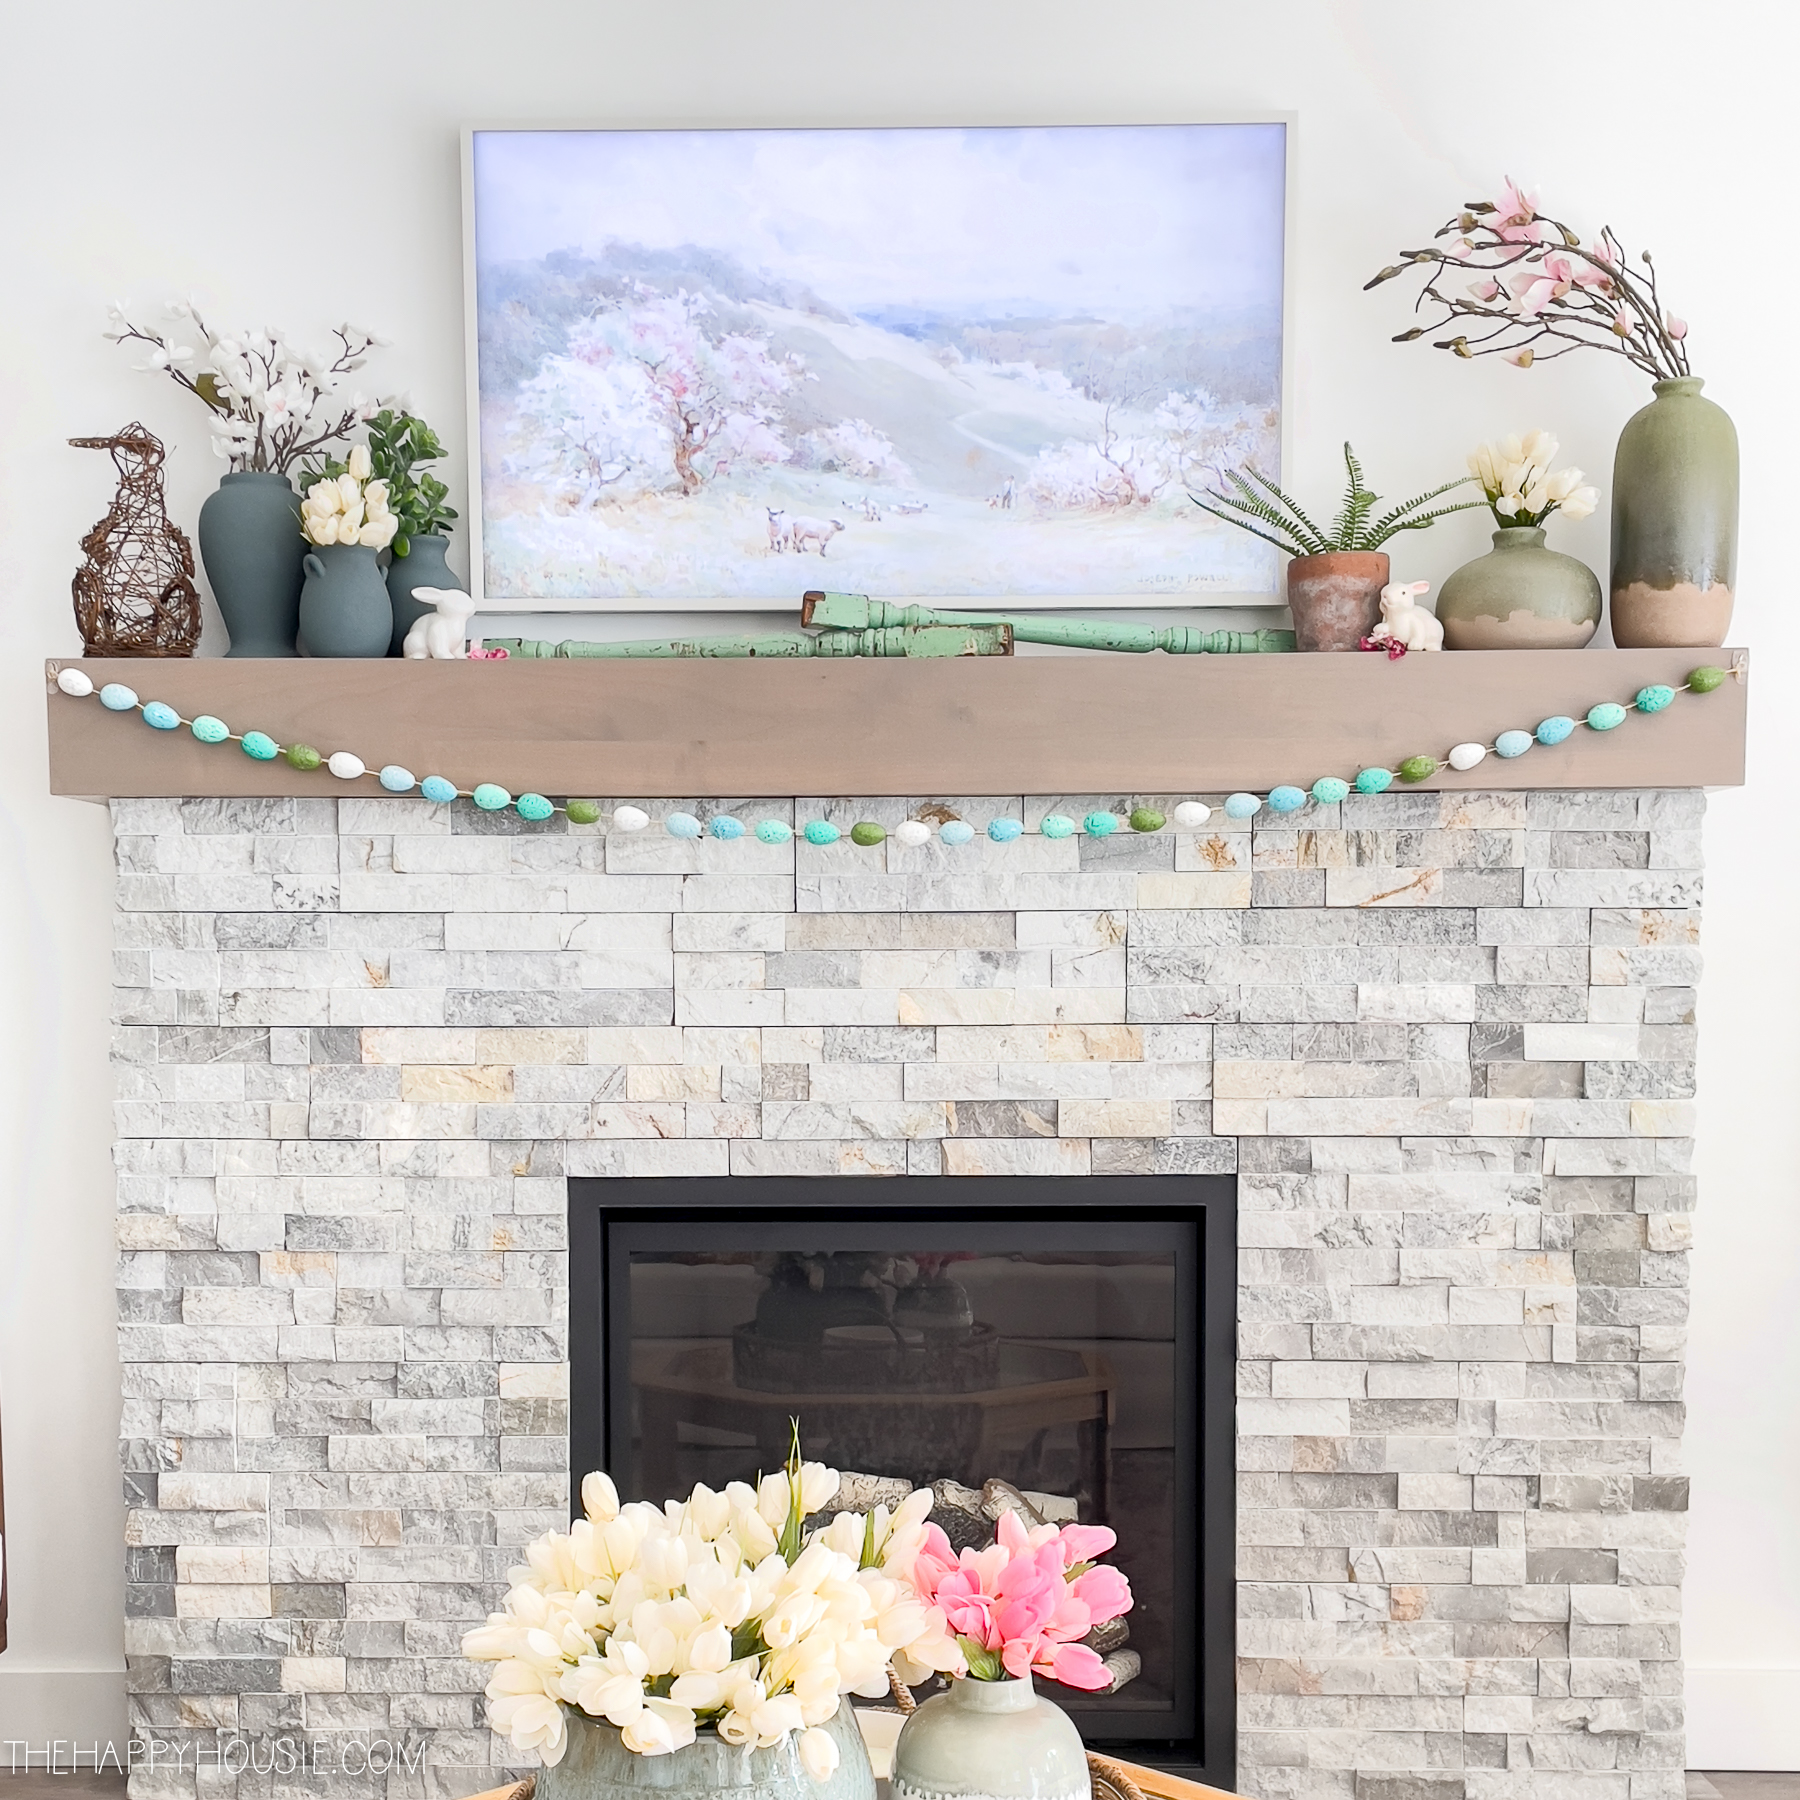 stone fireplace with wood mantel Easter decor on mantel